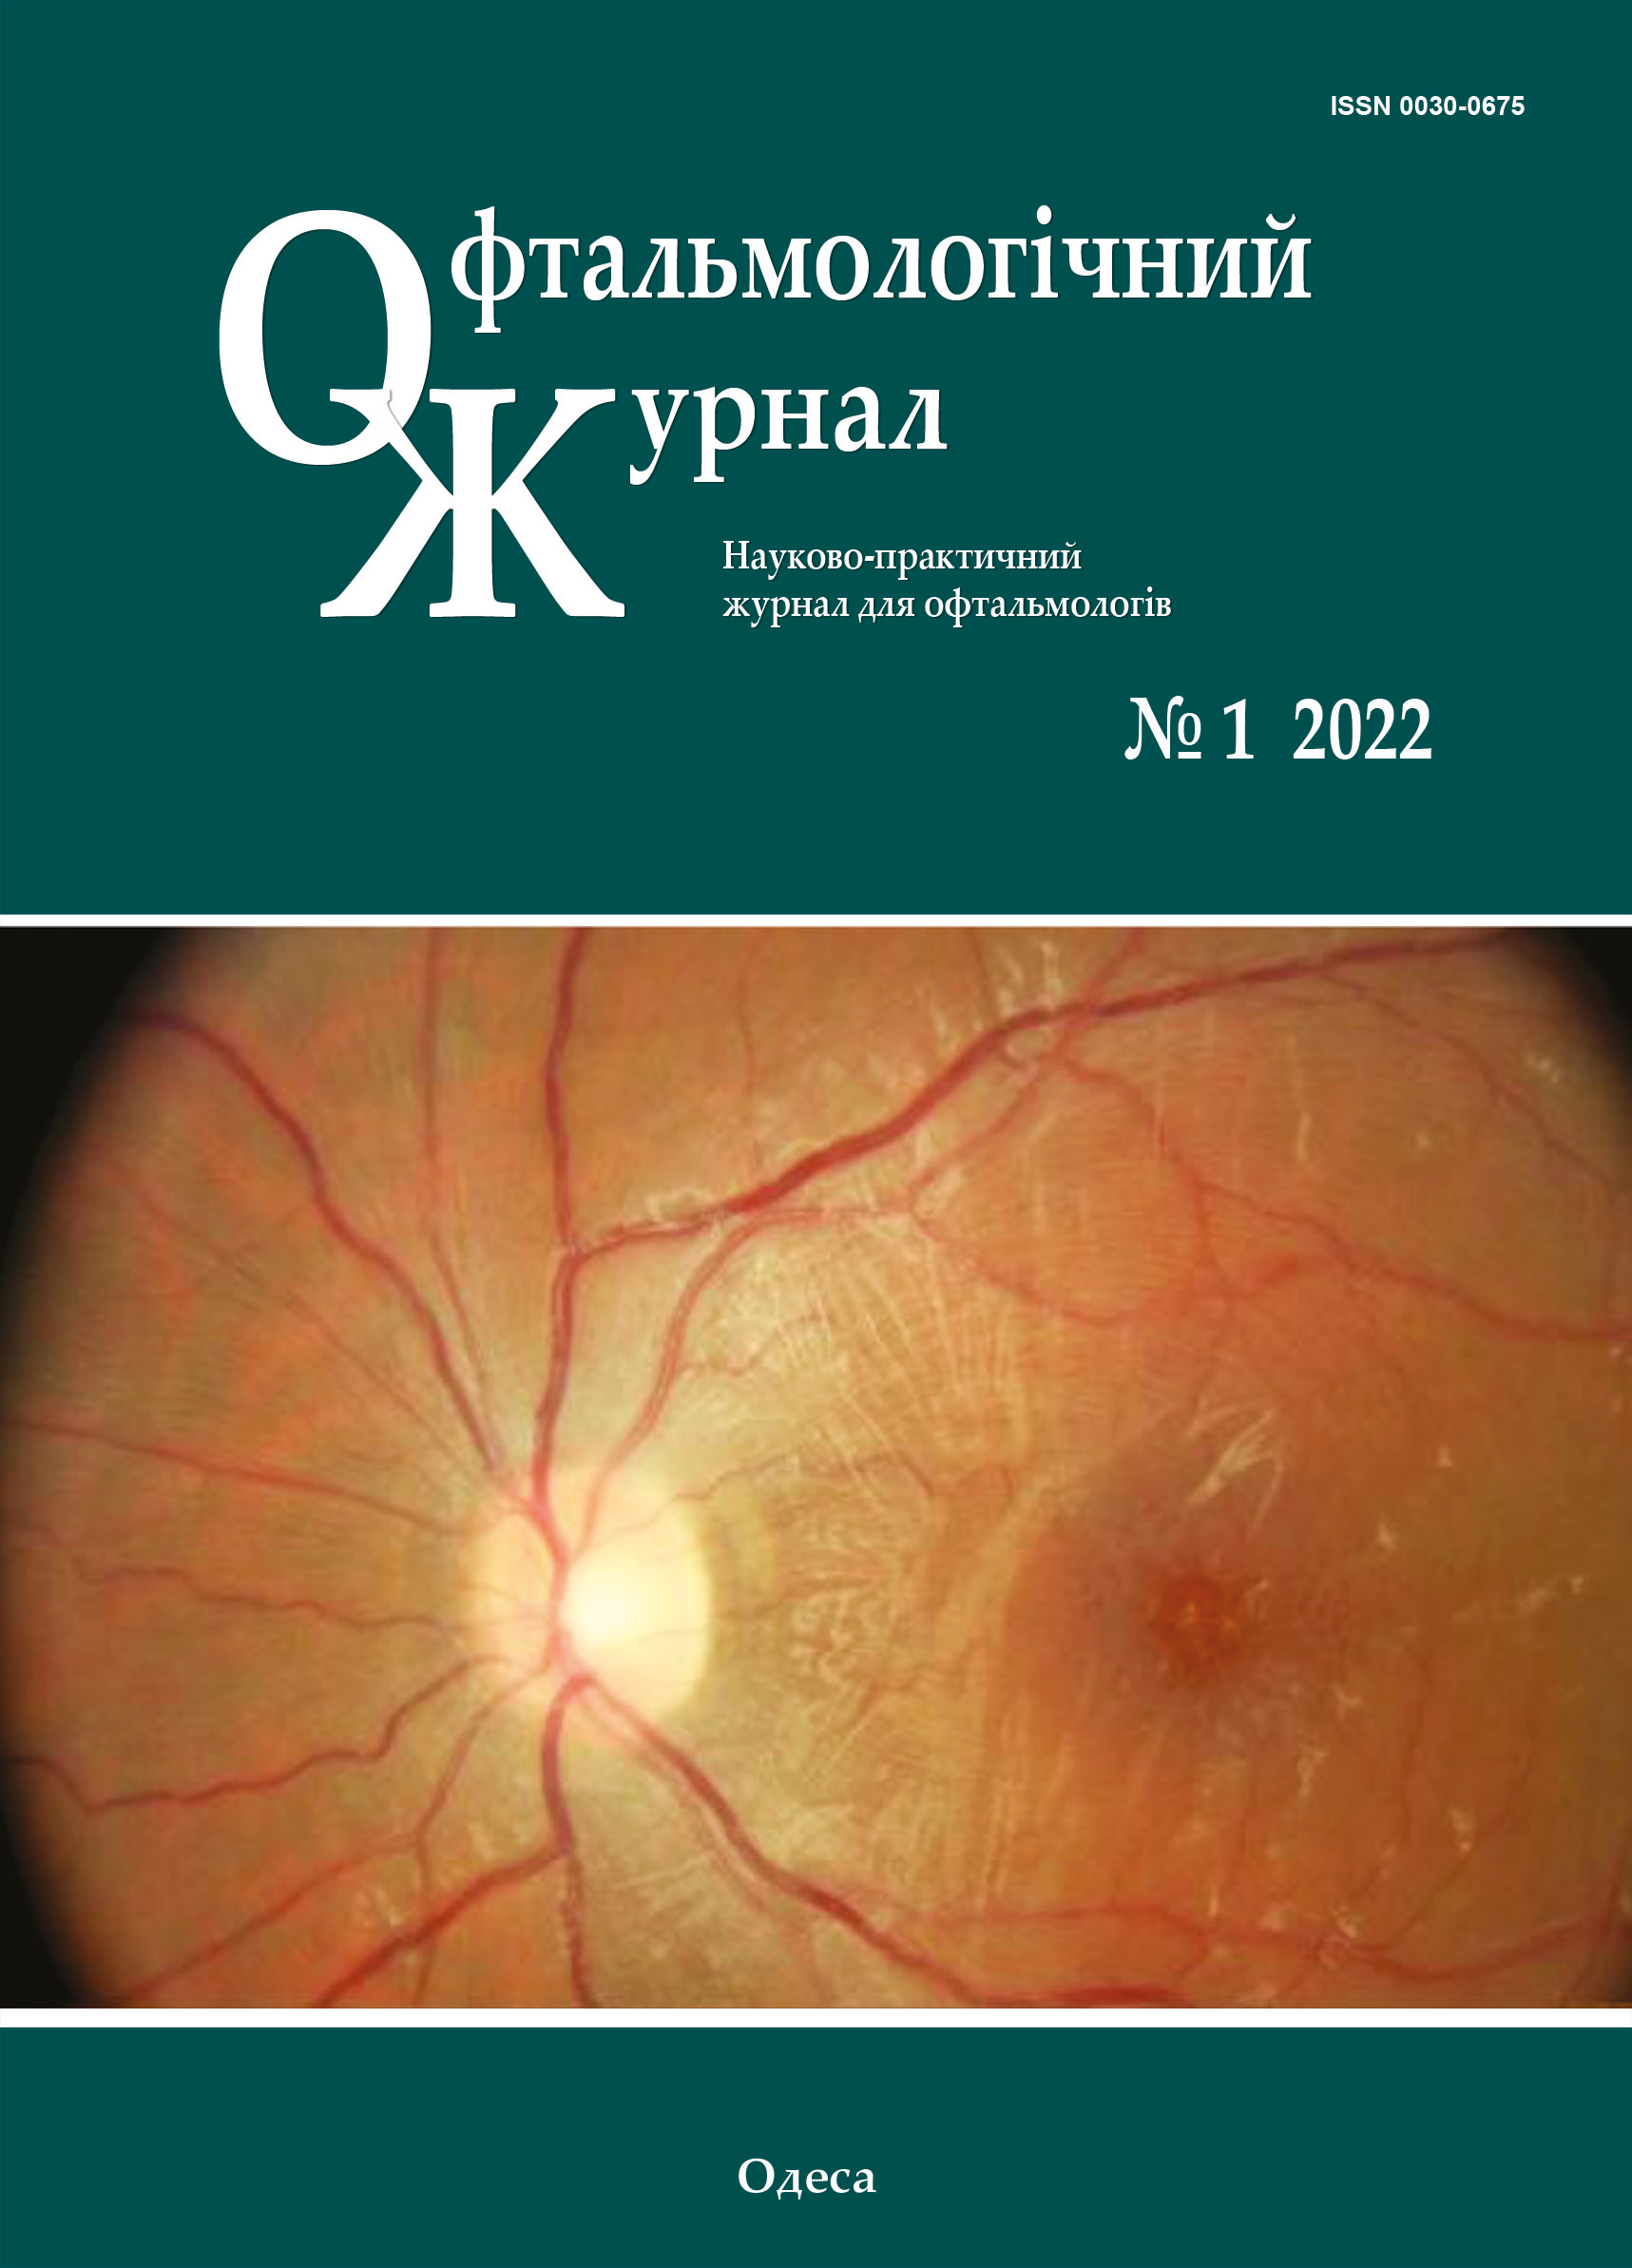 					View Vol. 504 No. 1 (2022): Journal of Ophthalmology (Ukraine)
				